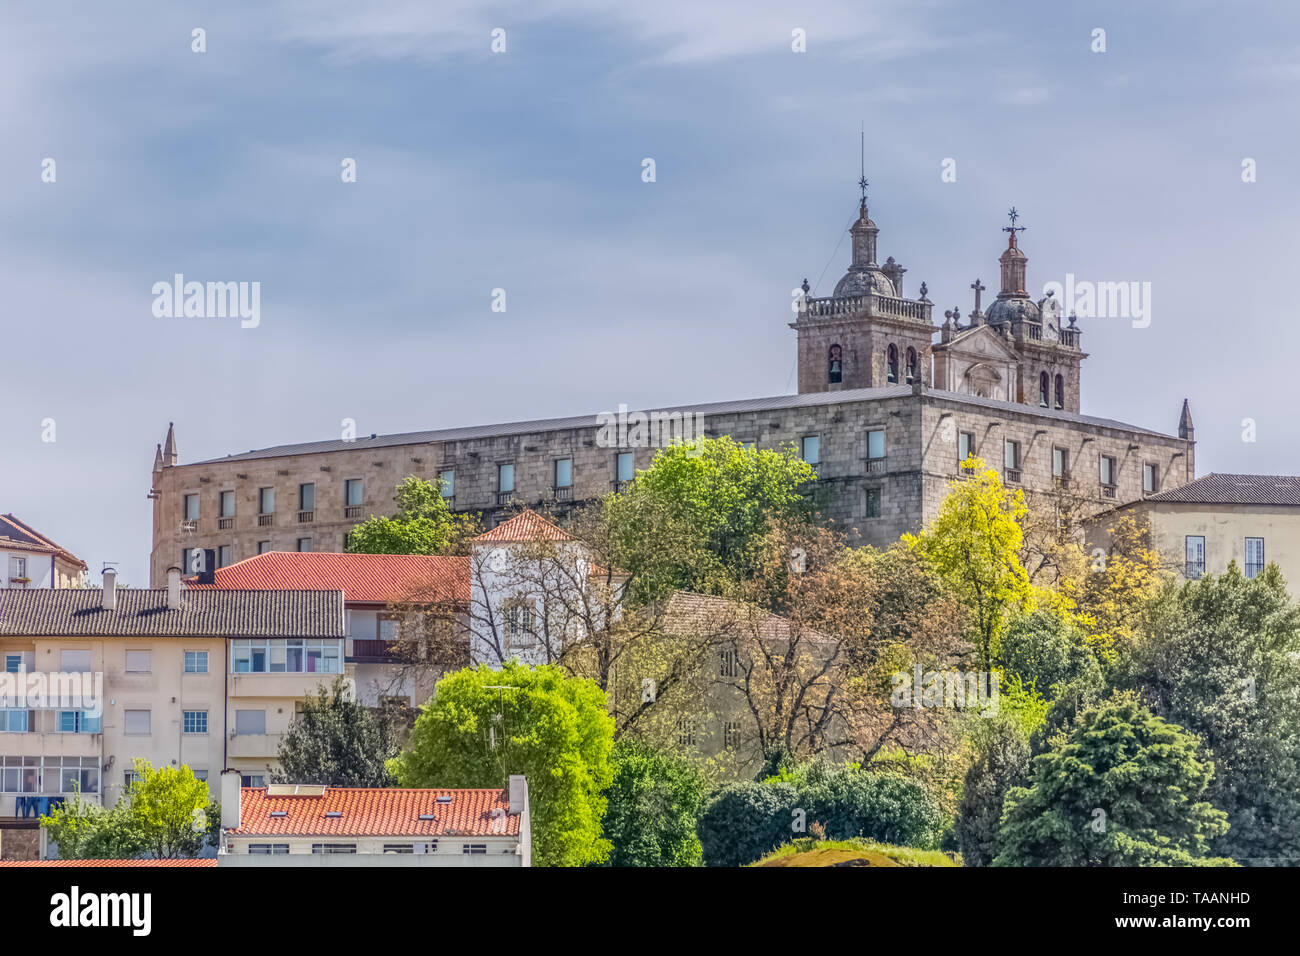 Viseu / Portugal - 04 16 2019 : View at the Viseu city, with Cathedral of Viseu on top, Sé Cathedral de Viseu, historical monument with various classi Stock Photo